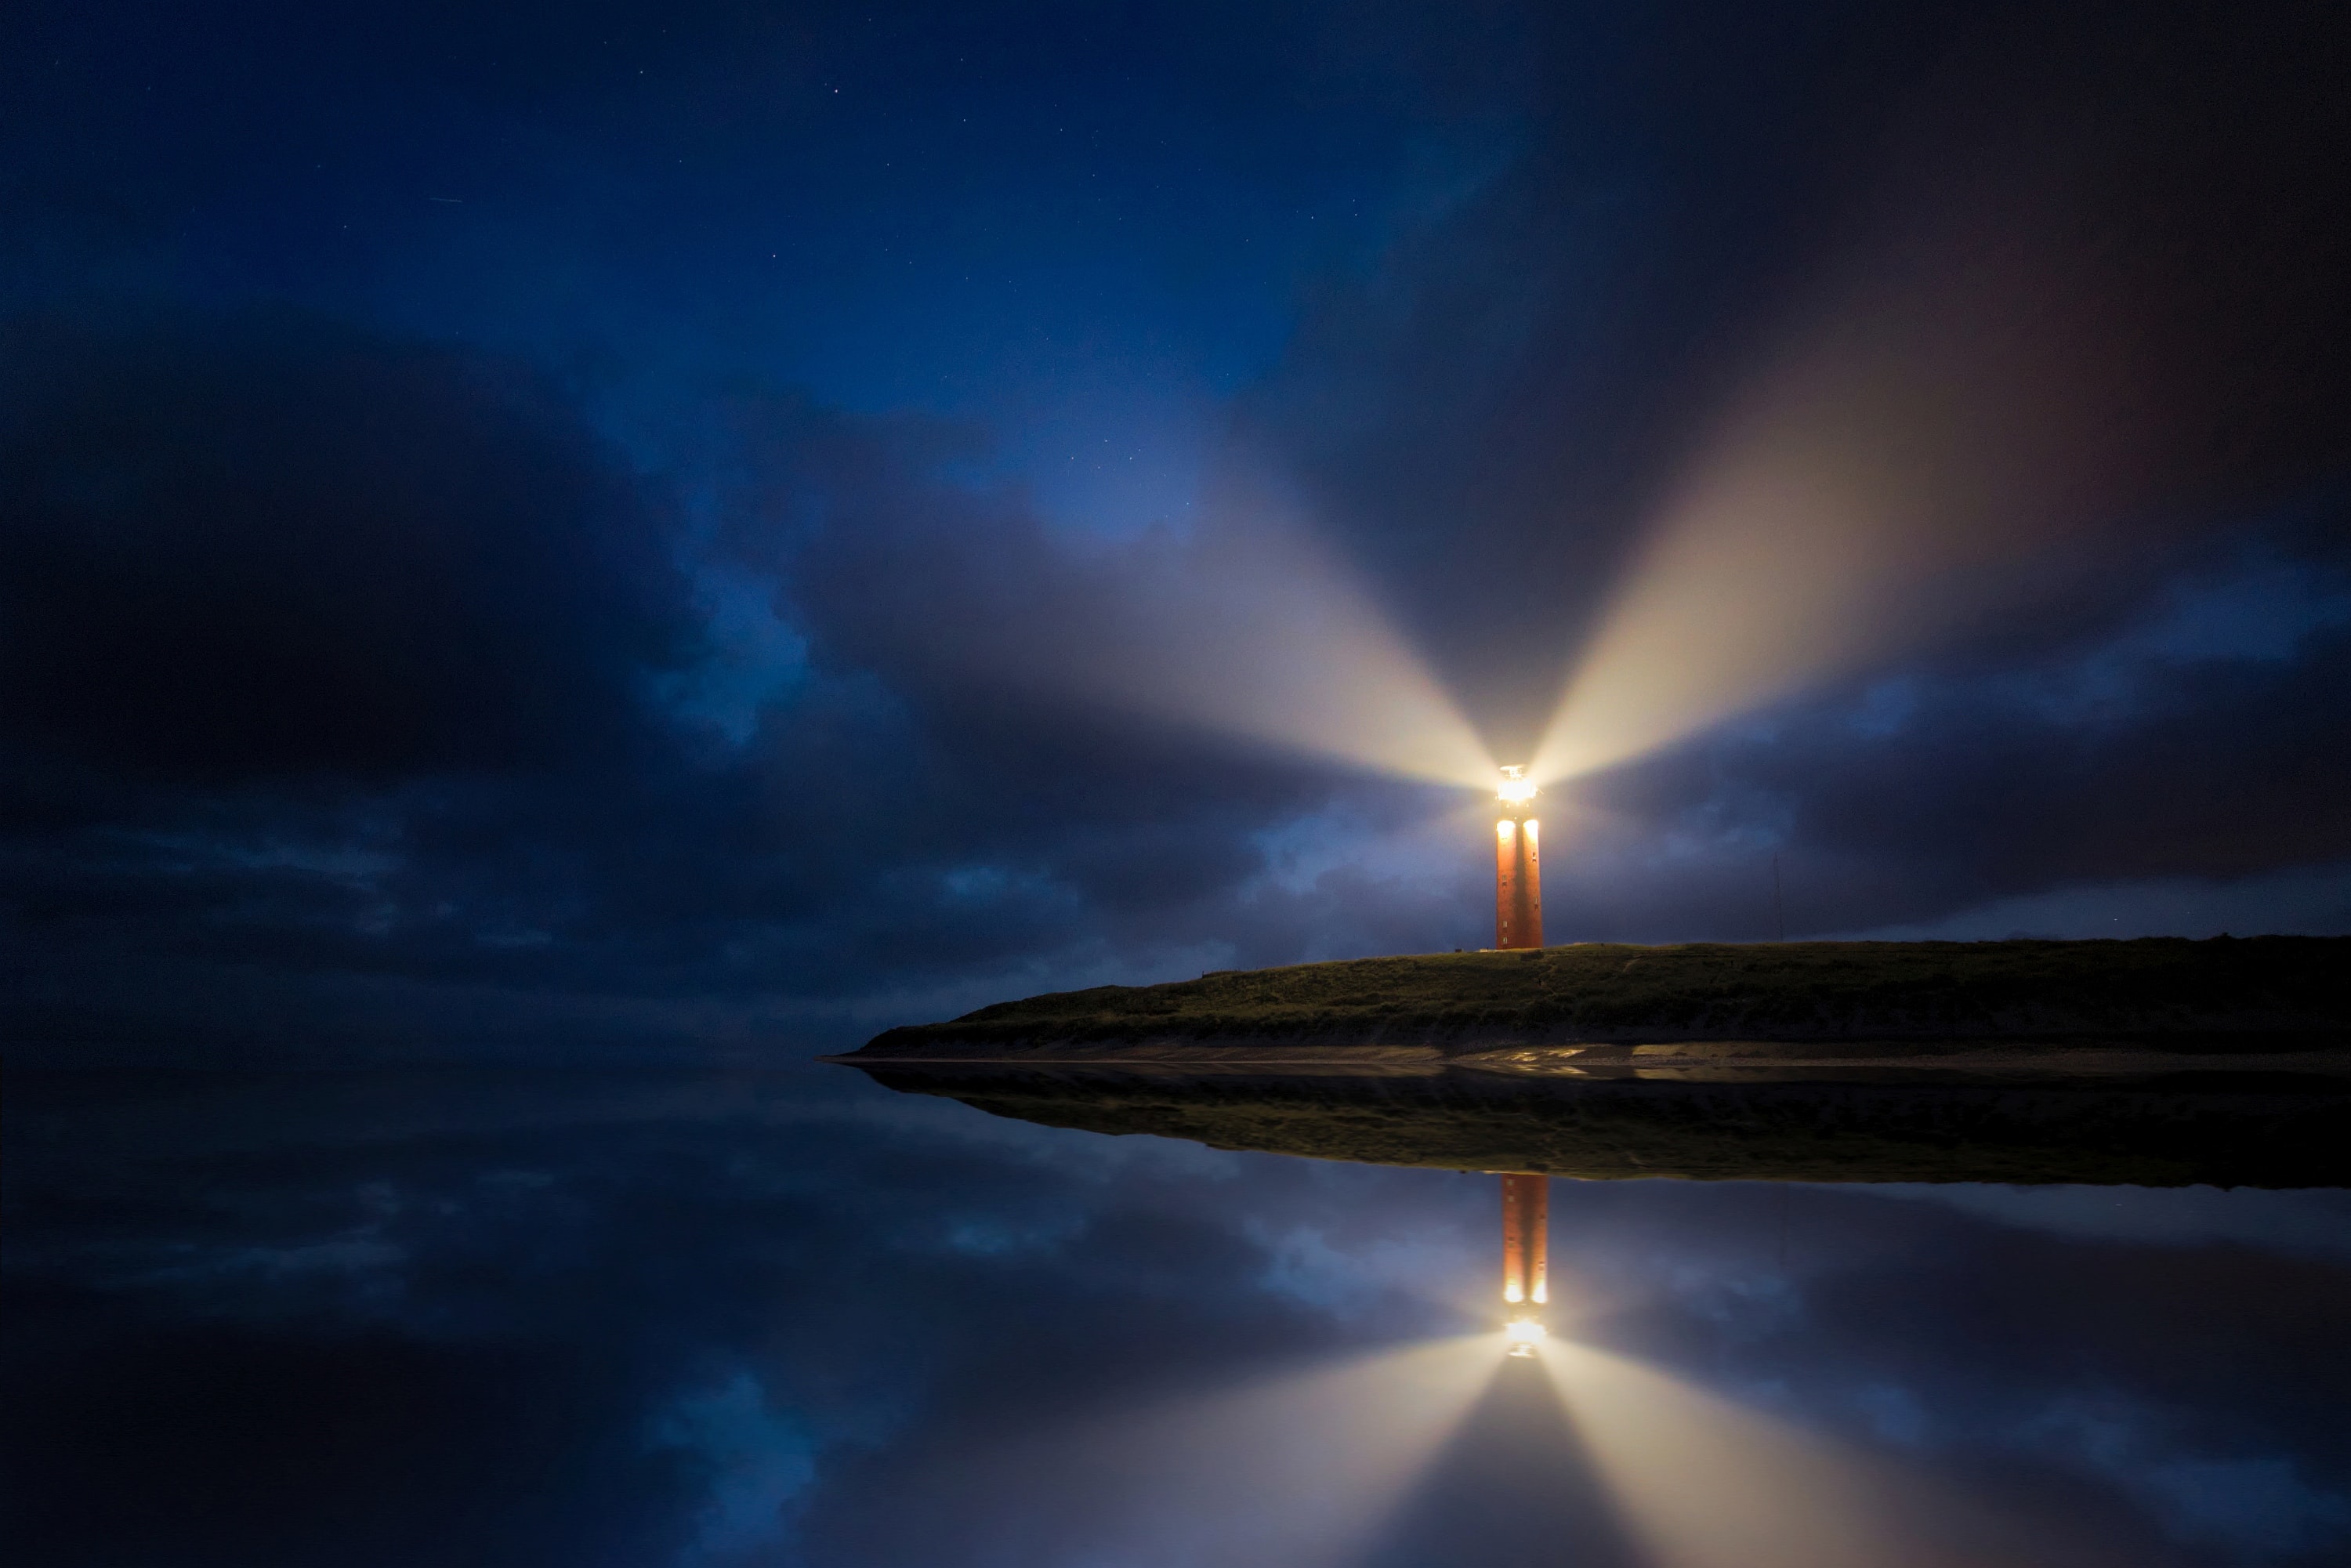 An image of a lighthouse at night, emitting a bright light beacon